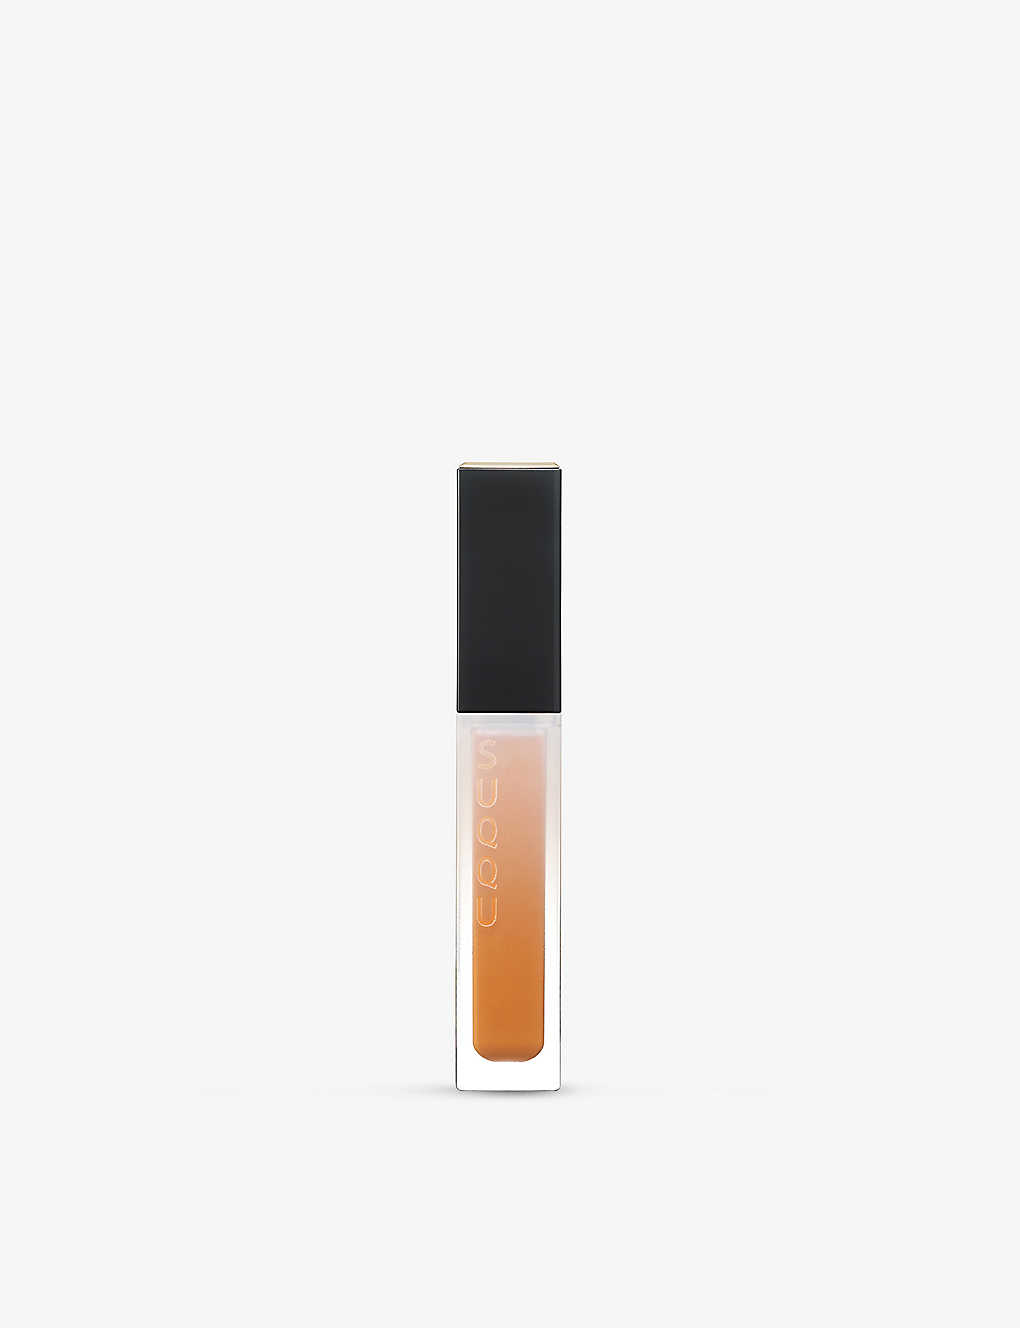 Suqqu 03 Yellow Brown Treatment Wrapping Lip Gloss 5.4g